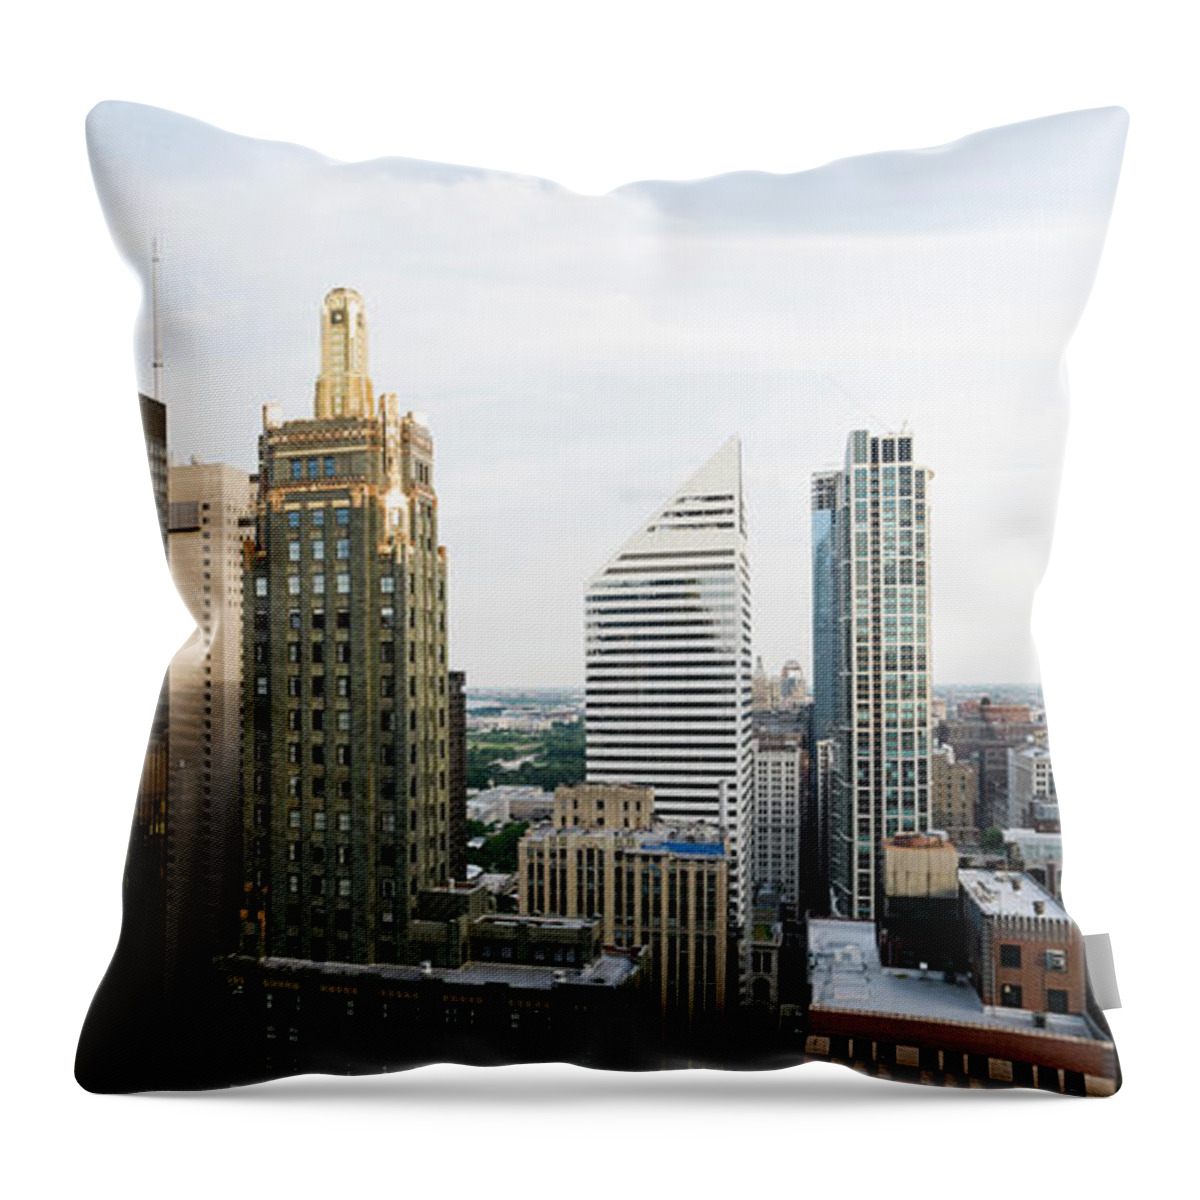 Scenics Throw Pillow featuring the photograph Aerial View Of Downtown Chicago by Chrisp0